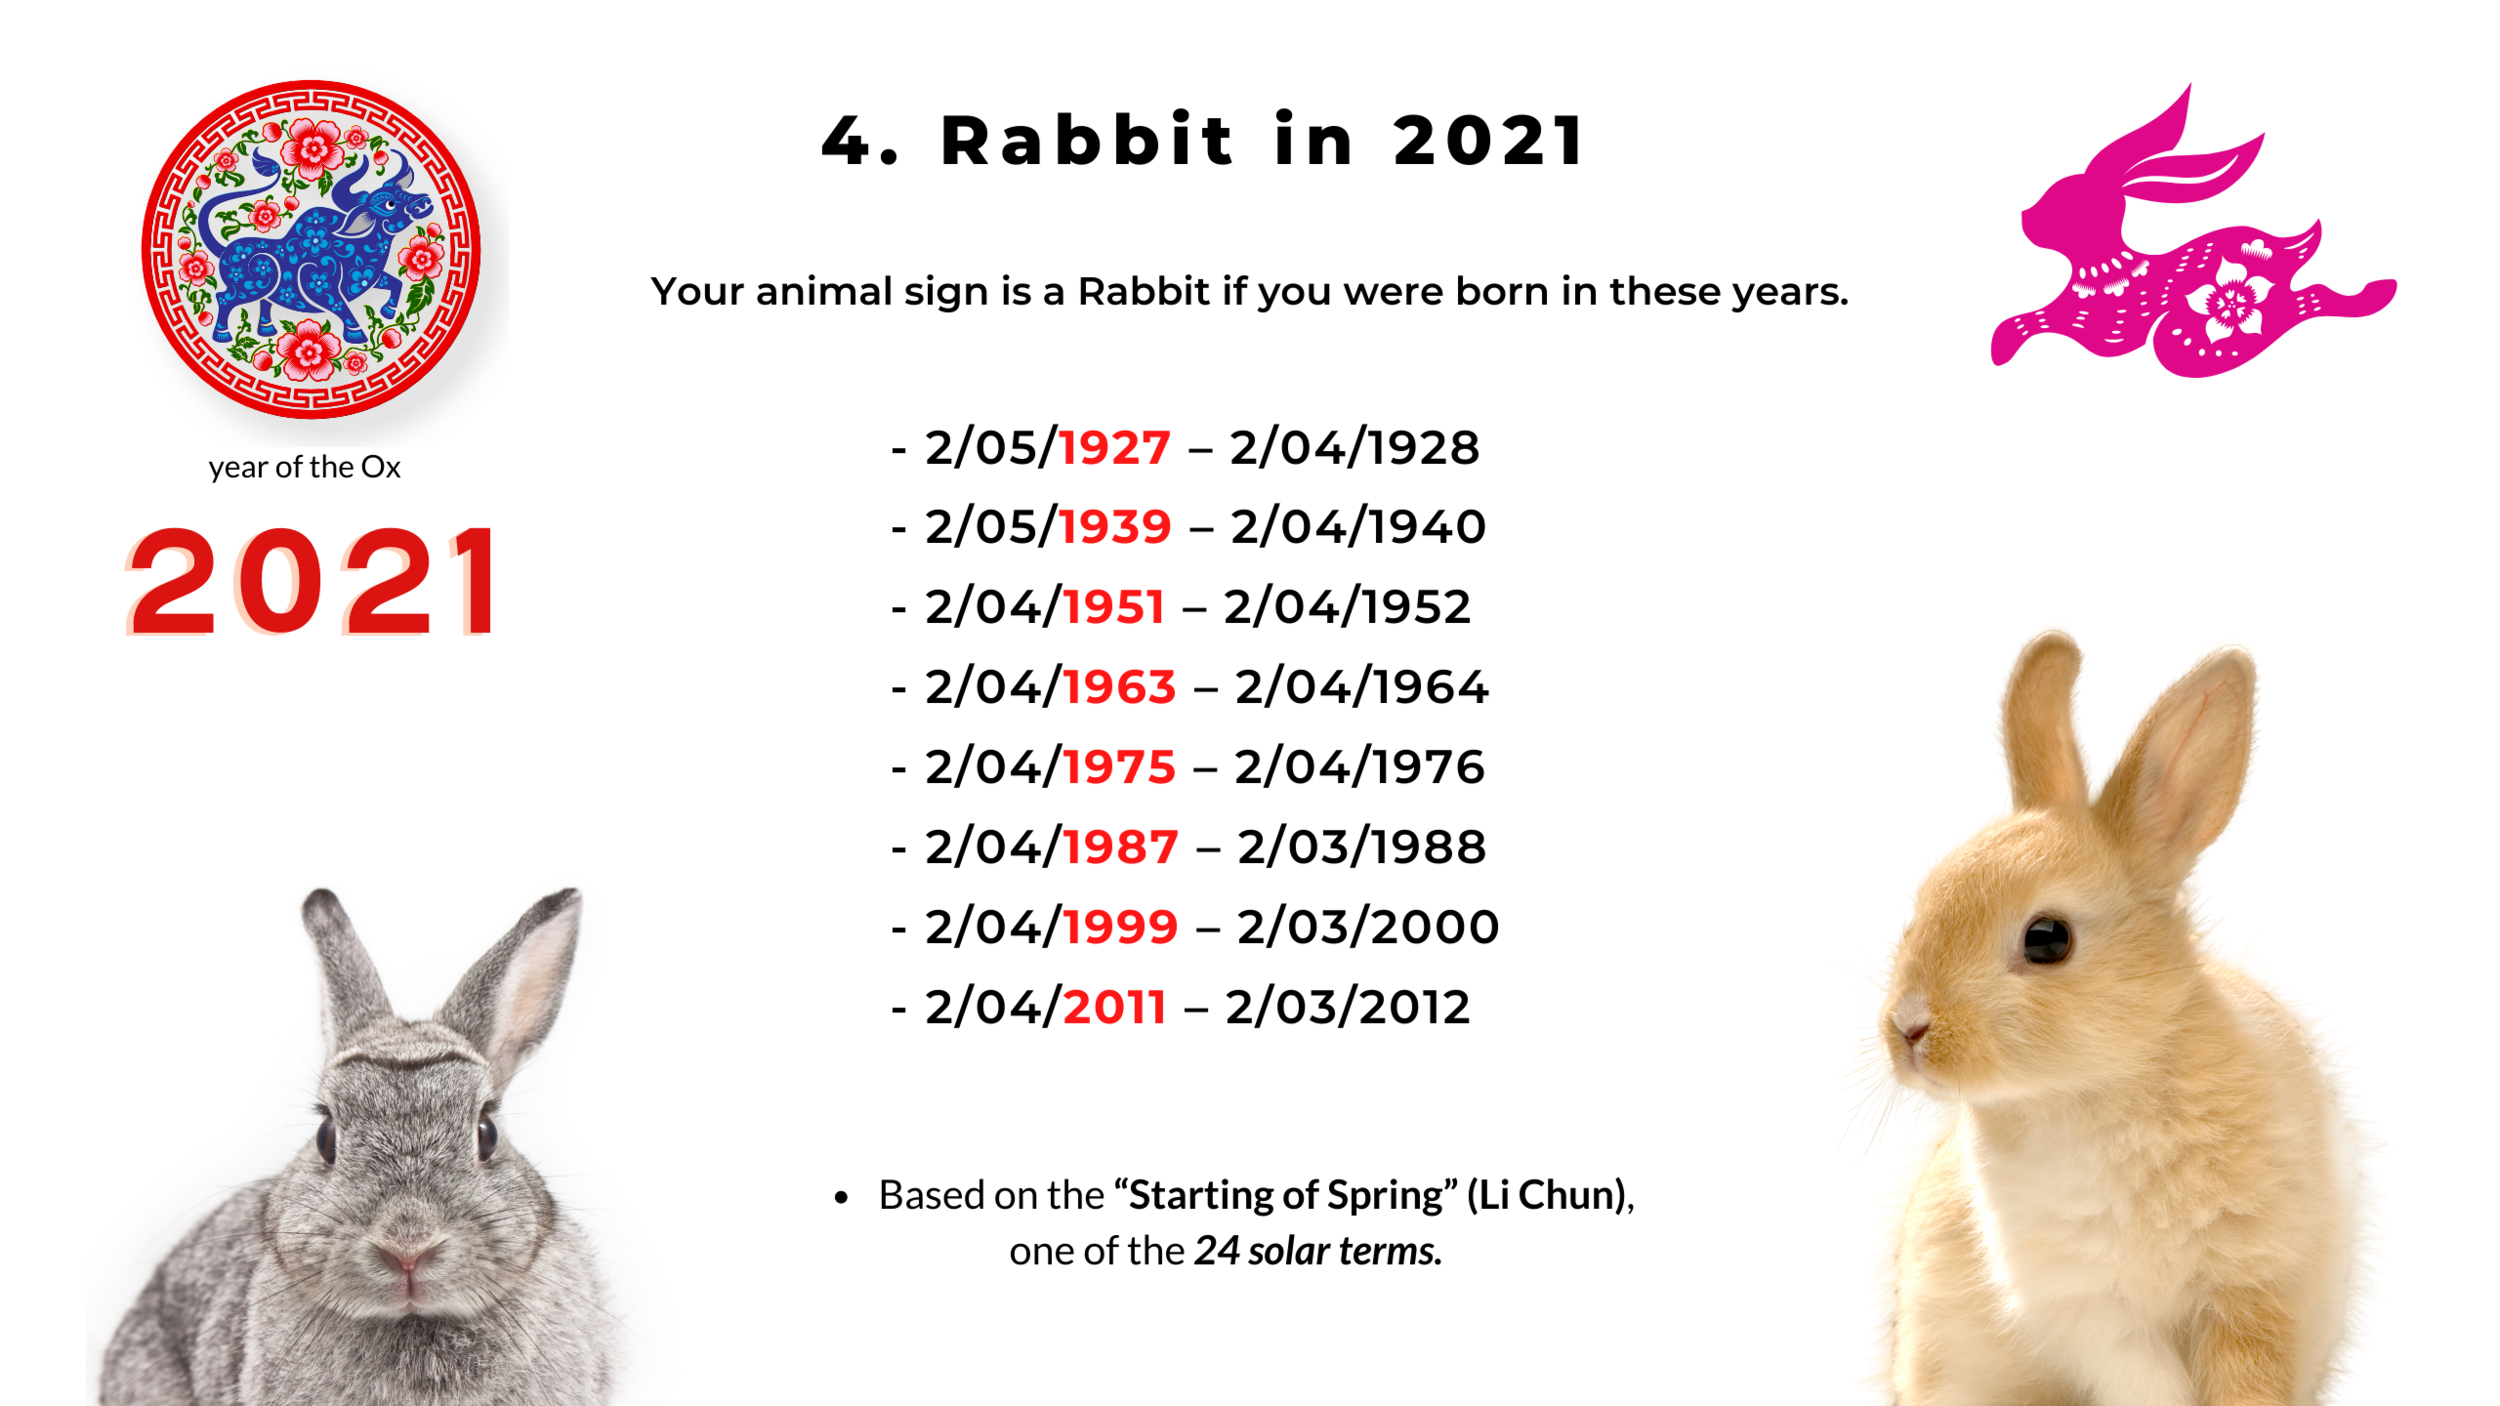 2021 Ox year Part 2 of Chinese zodiac analysis - Rabbit, Dragon, and Snake  — Picture Healer - Feng Shui and fortune telling